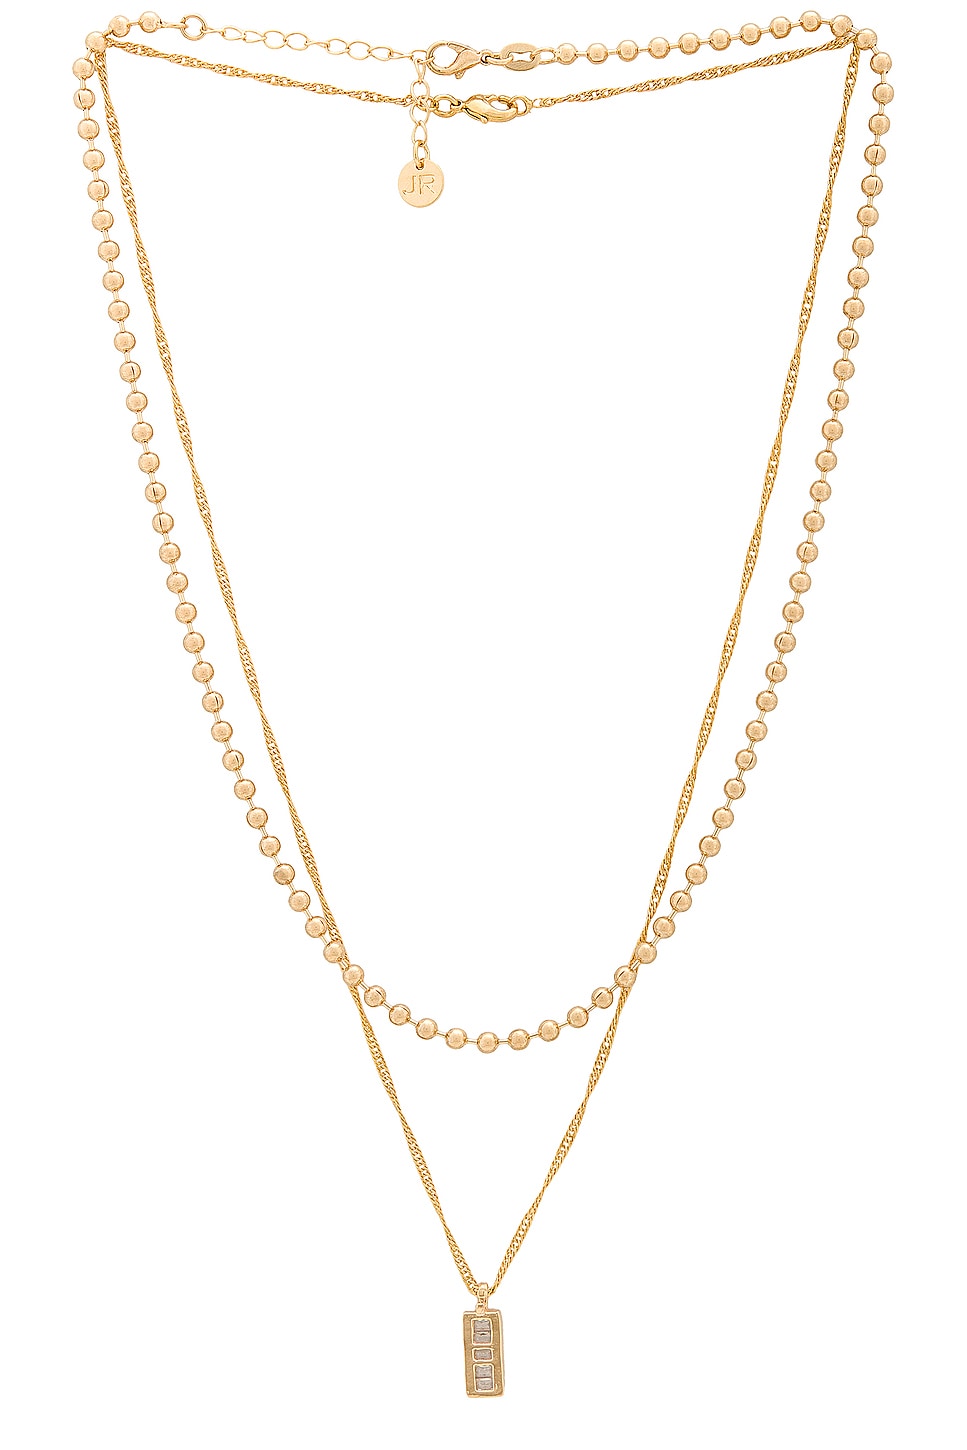 Rendezvous Necklace Stack in Metallic Gold